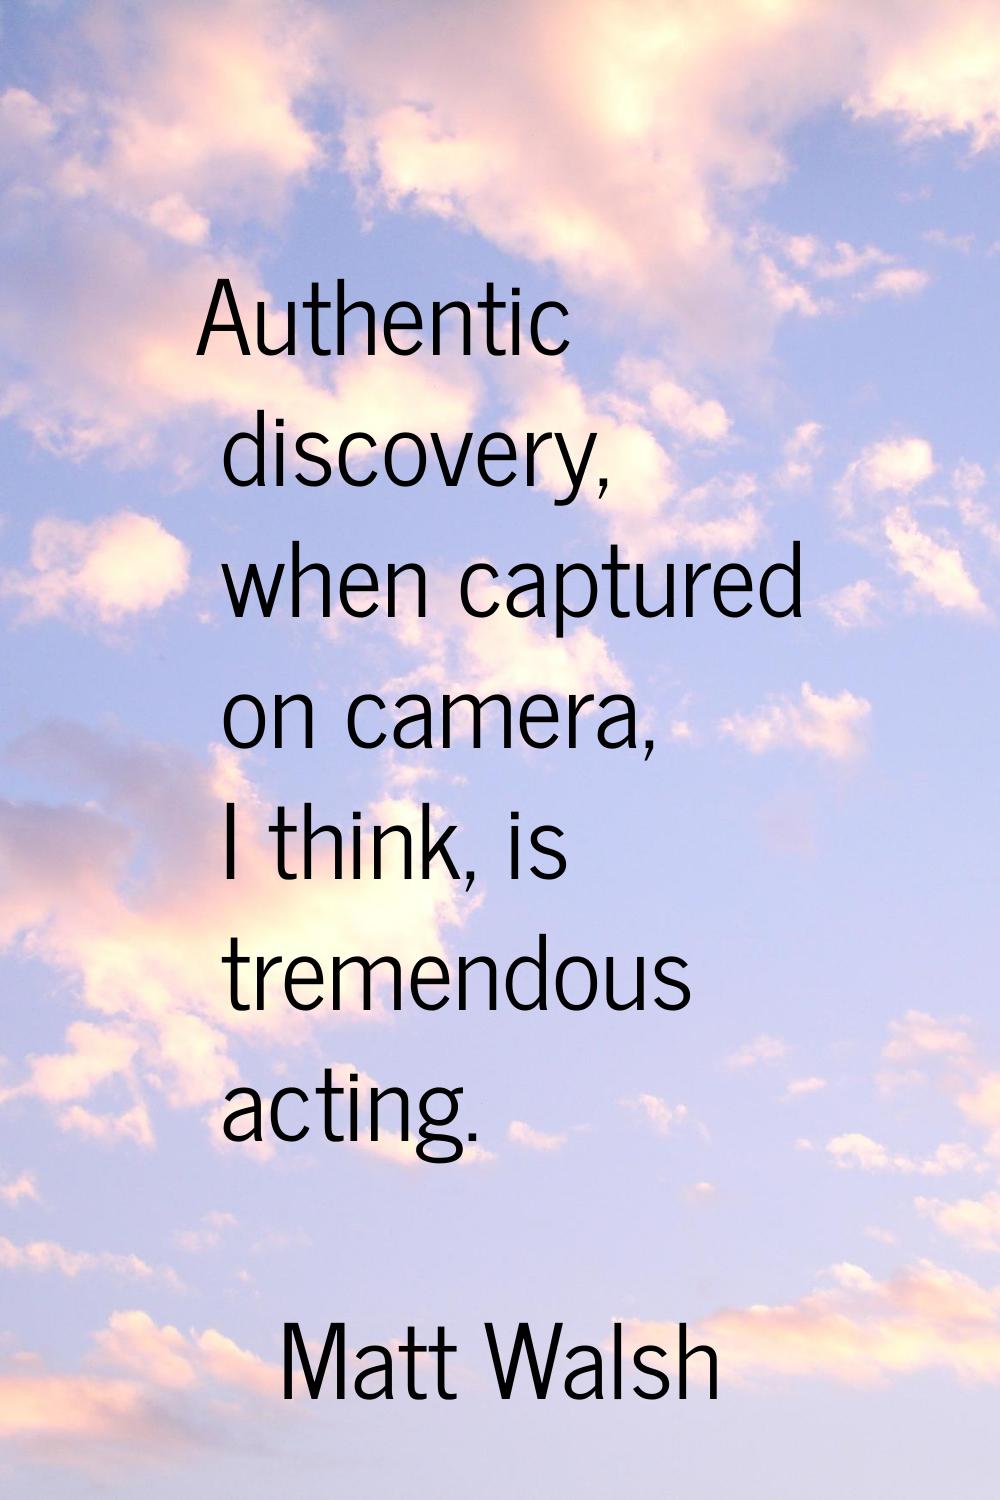 Authentic discovery, when captured on camera, I think, is tremendous acting.